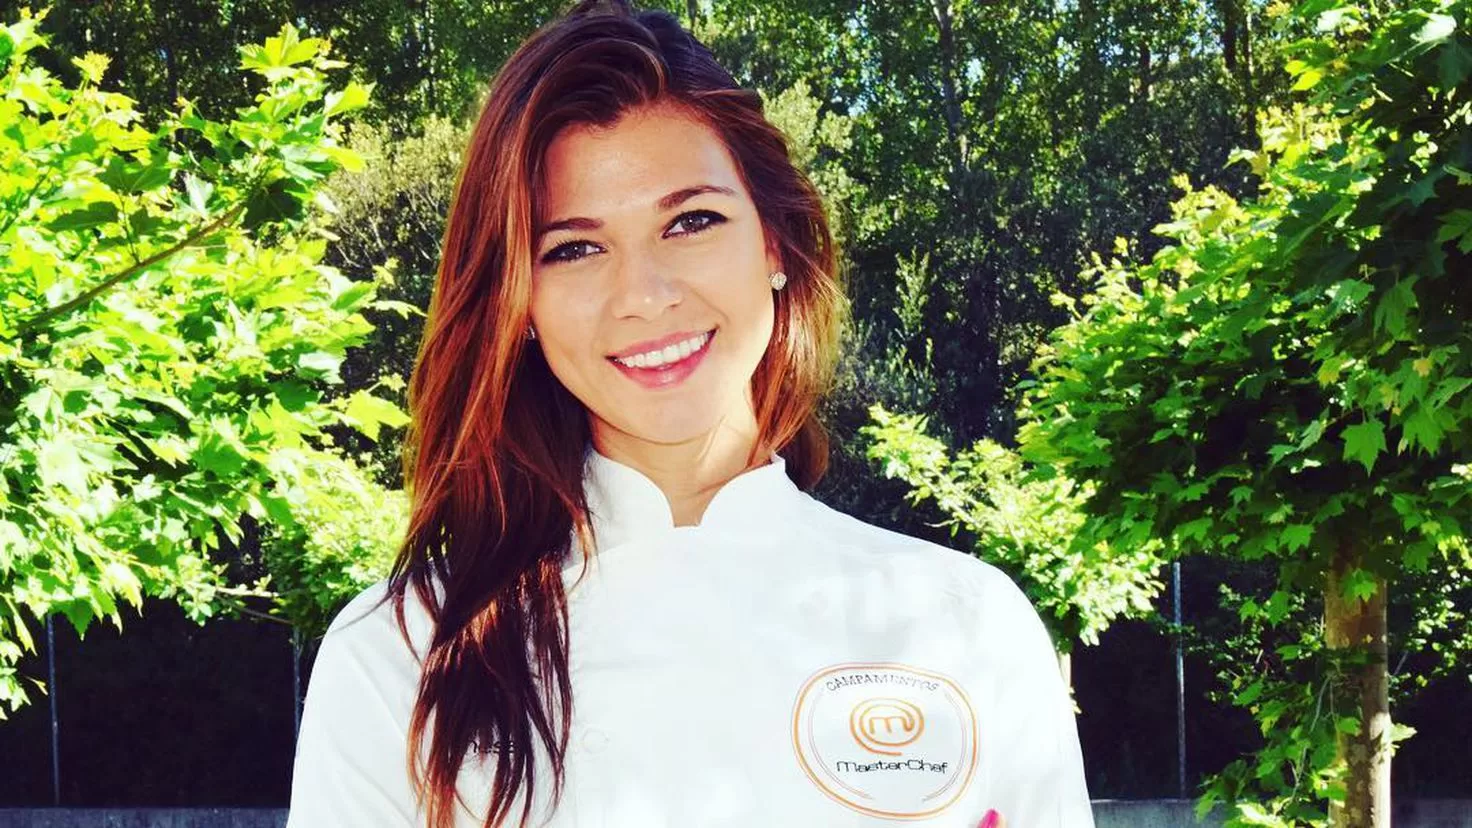 Natalia Khod, the former MasterChef contestant who triumphs in The one that is coming
